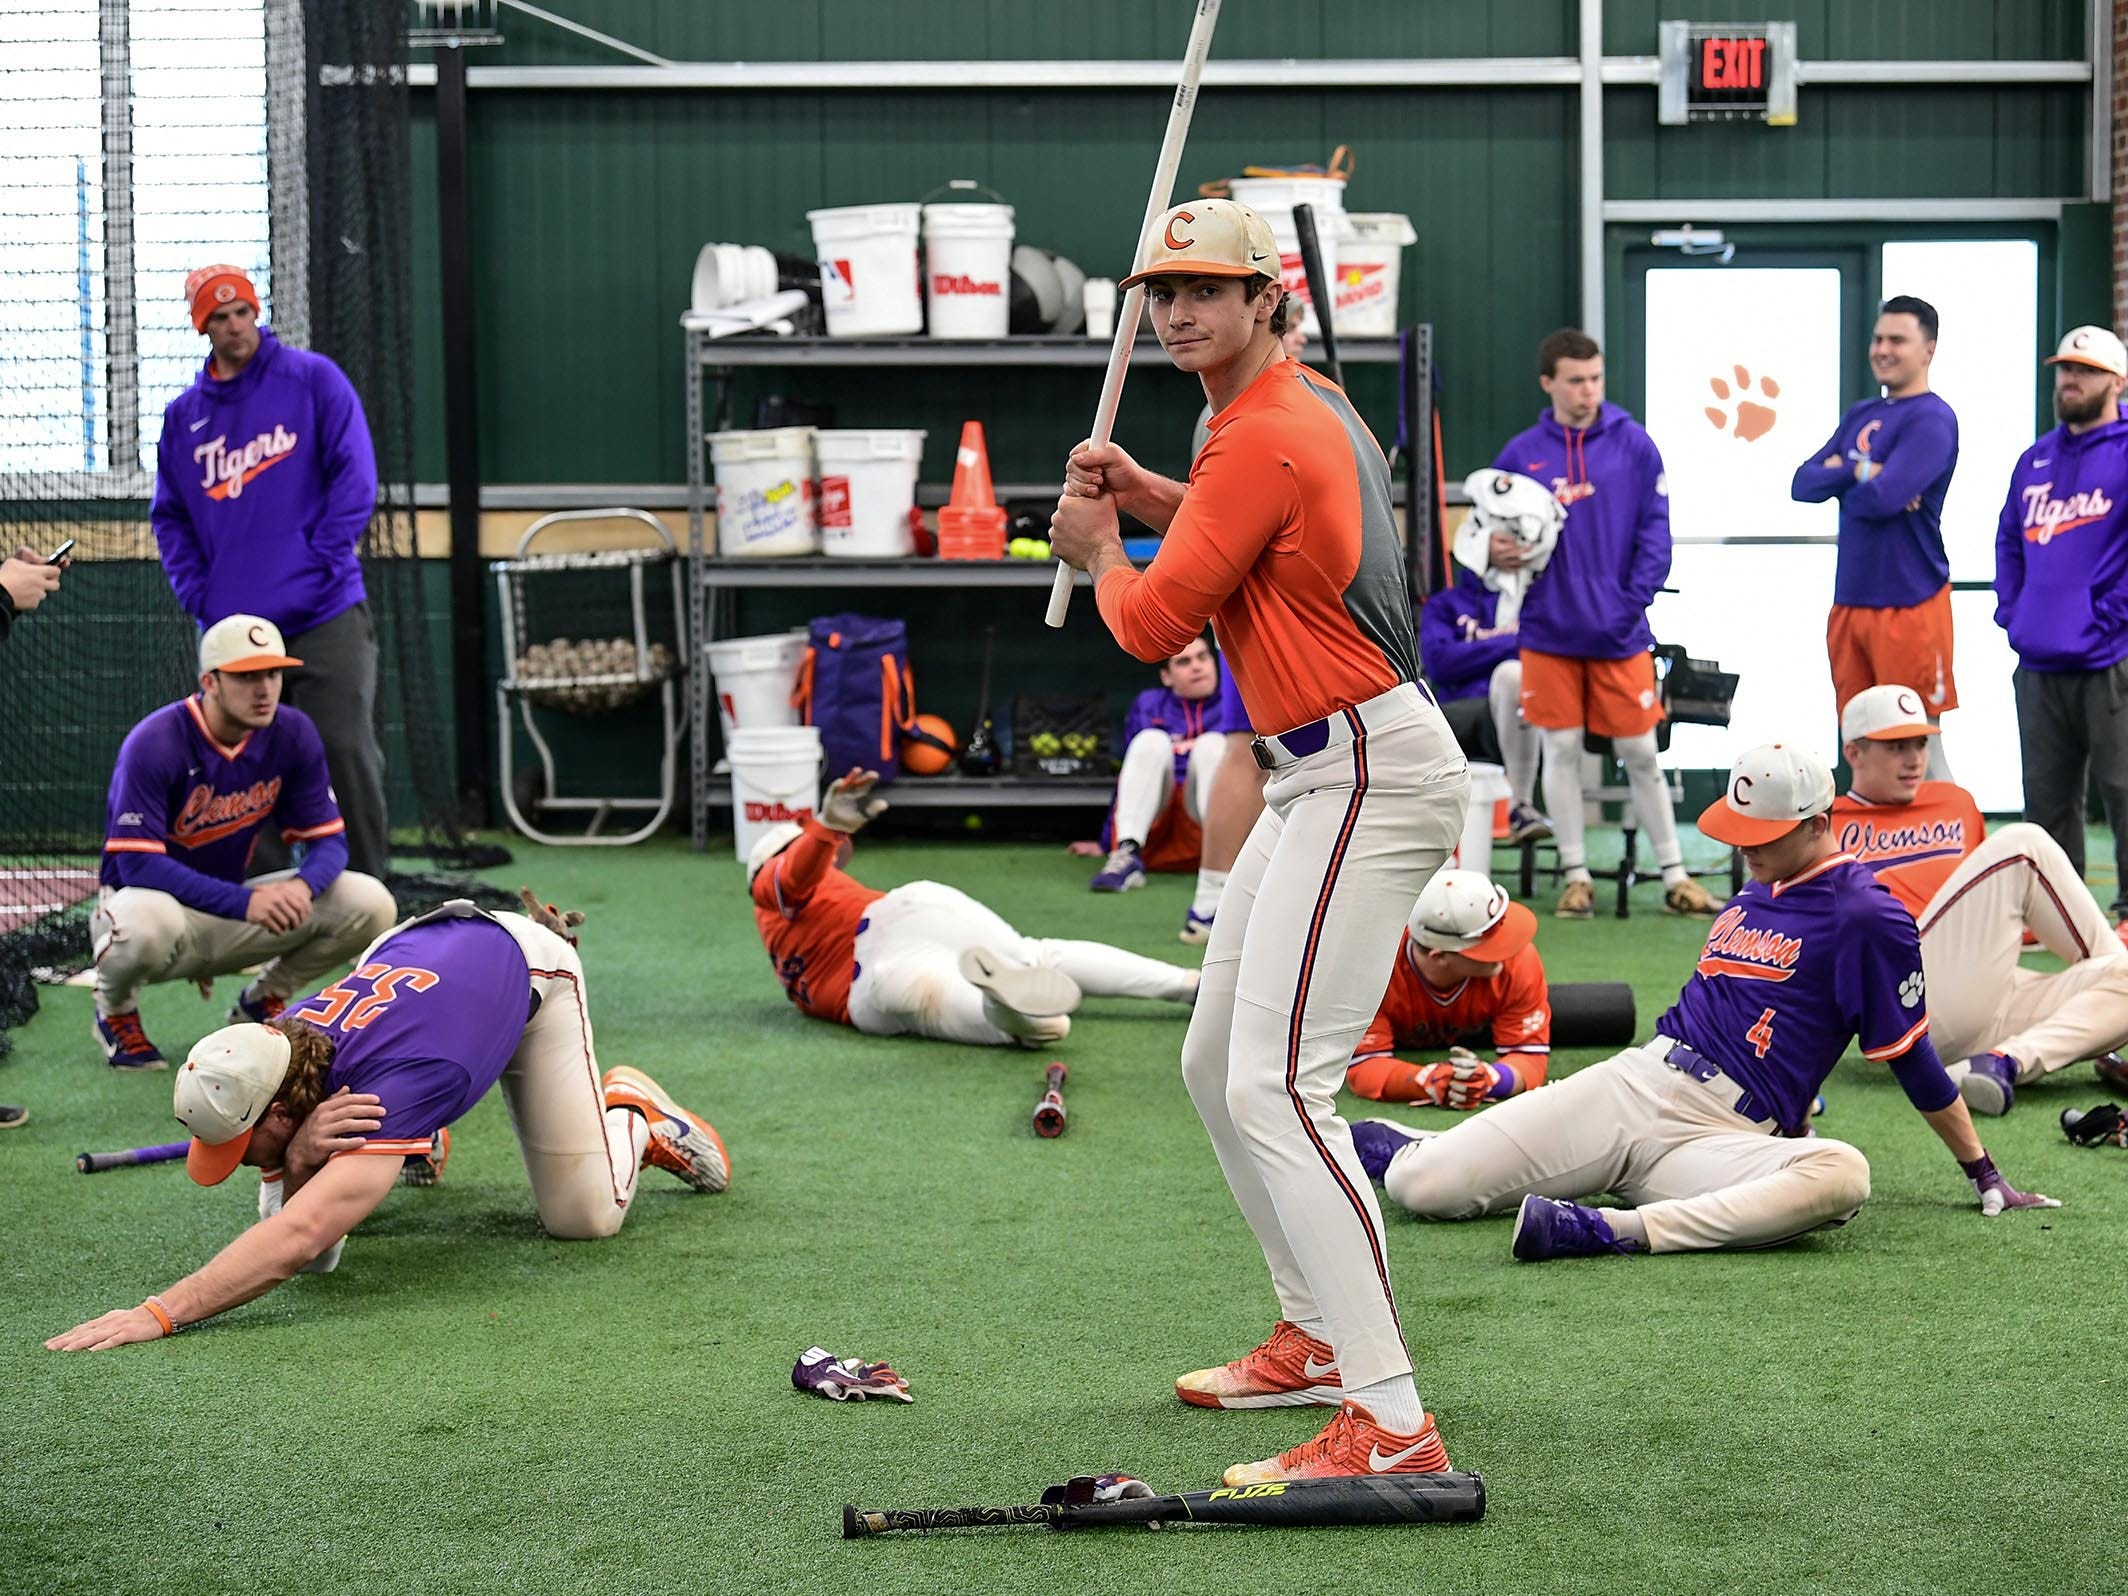 Clemson junior Bryce Teodosio (13), middle, uses a pvc pipe warming up during the first official team Spring practice at Doug Kingsmore Stadium in Clemson Friday, January 24, 2020.